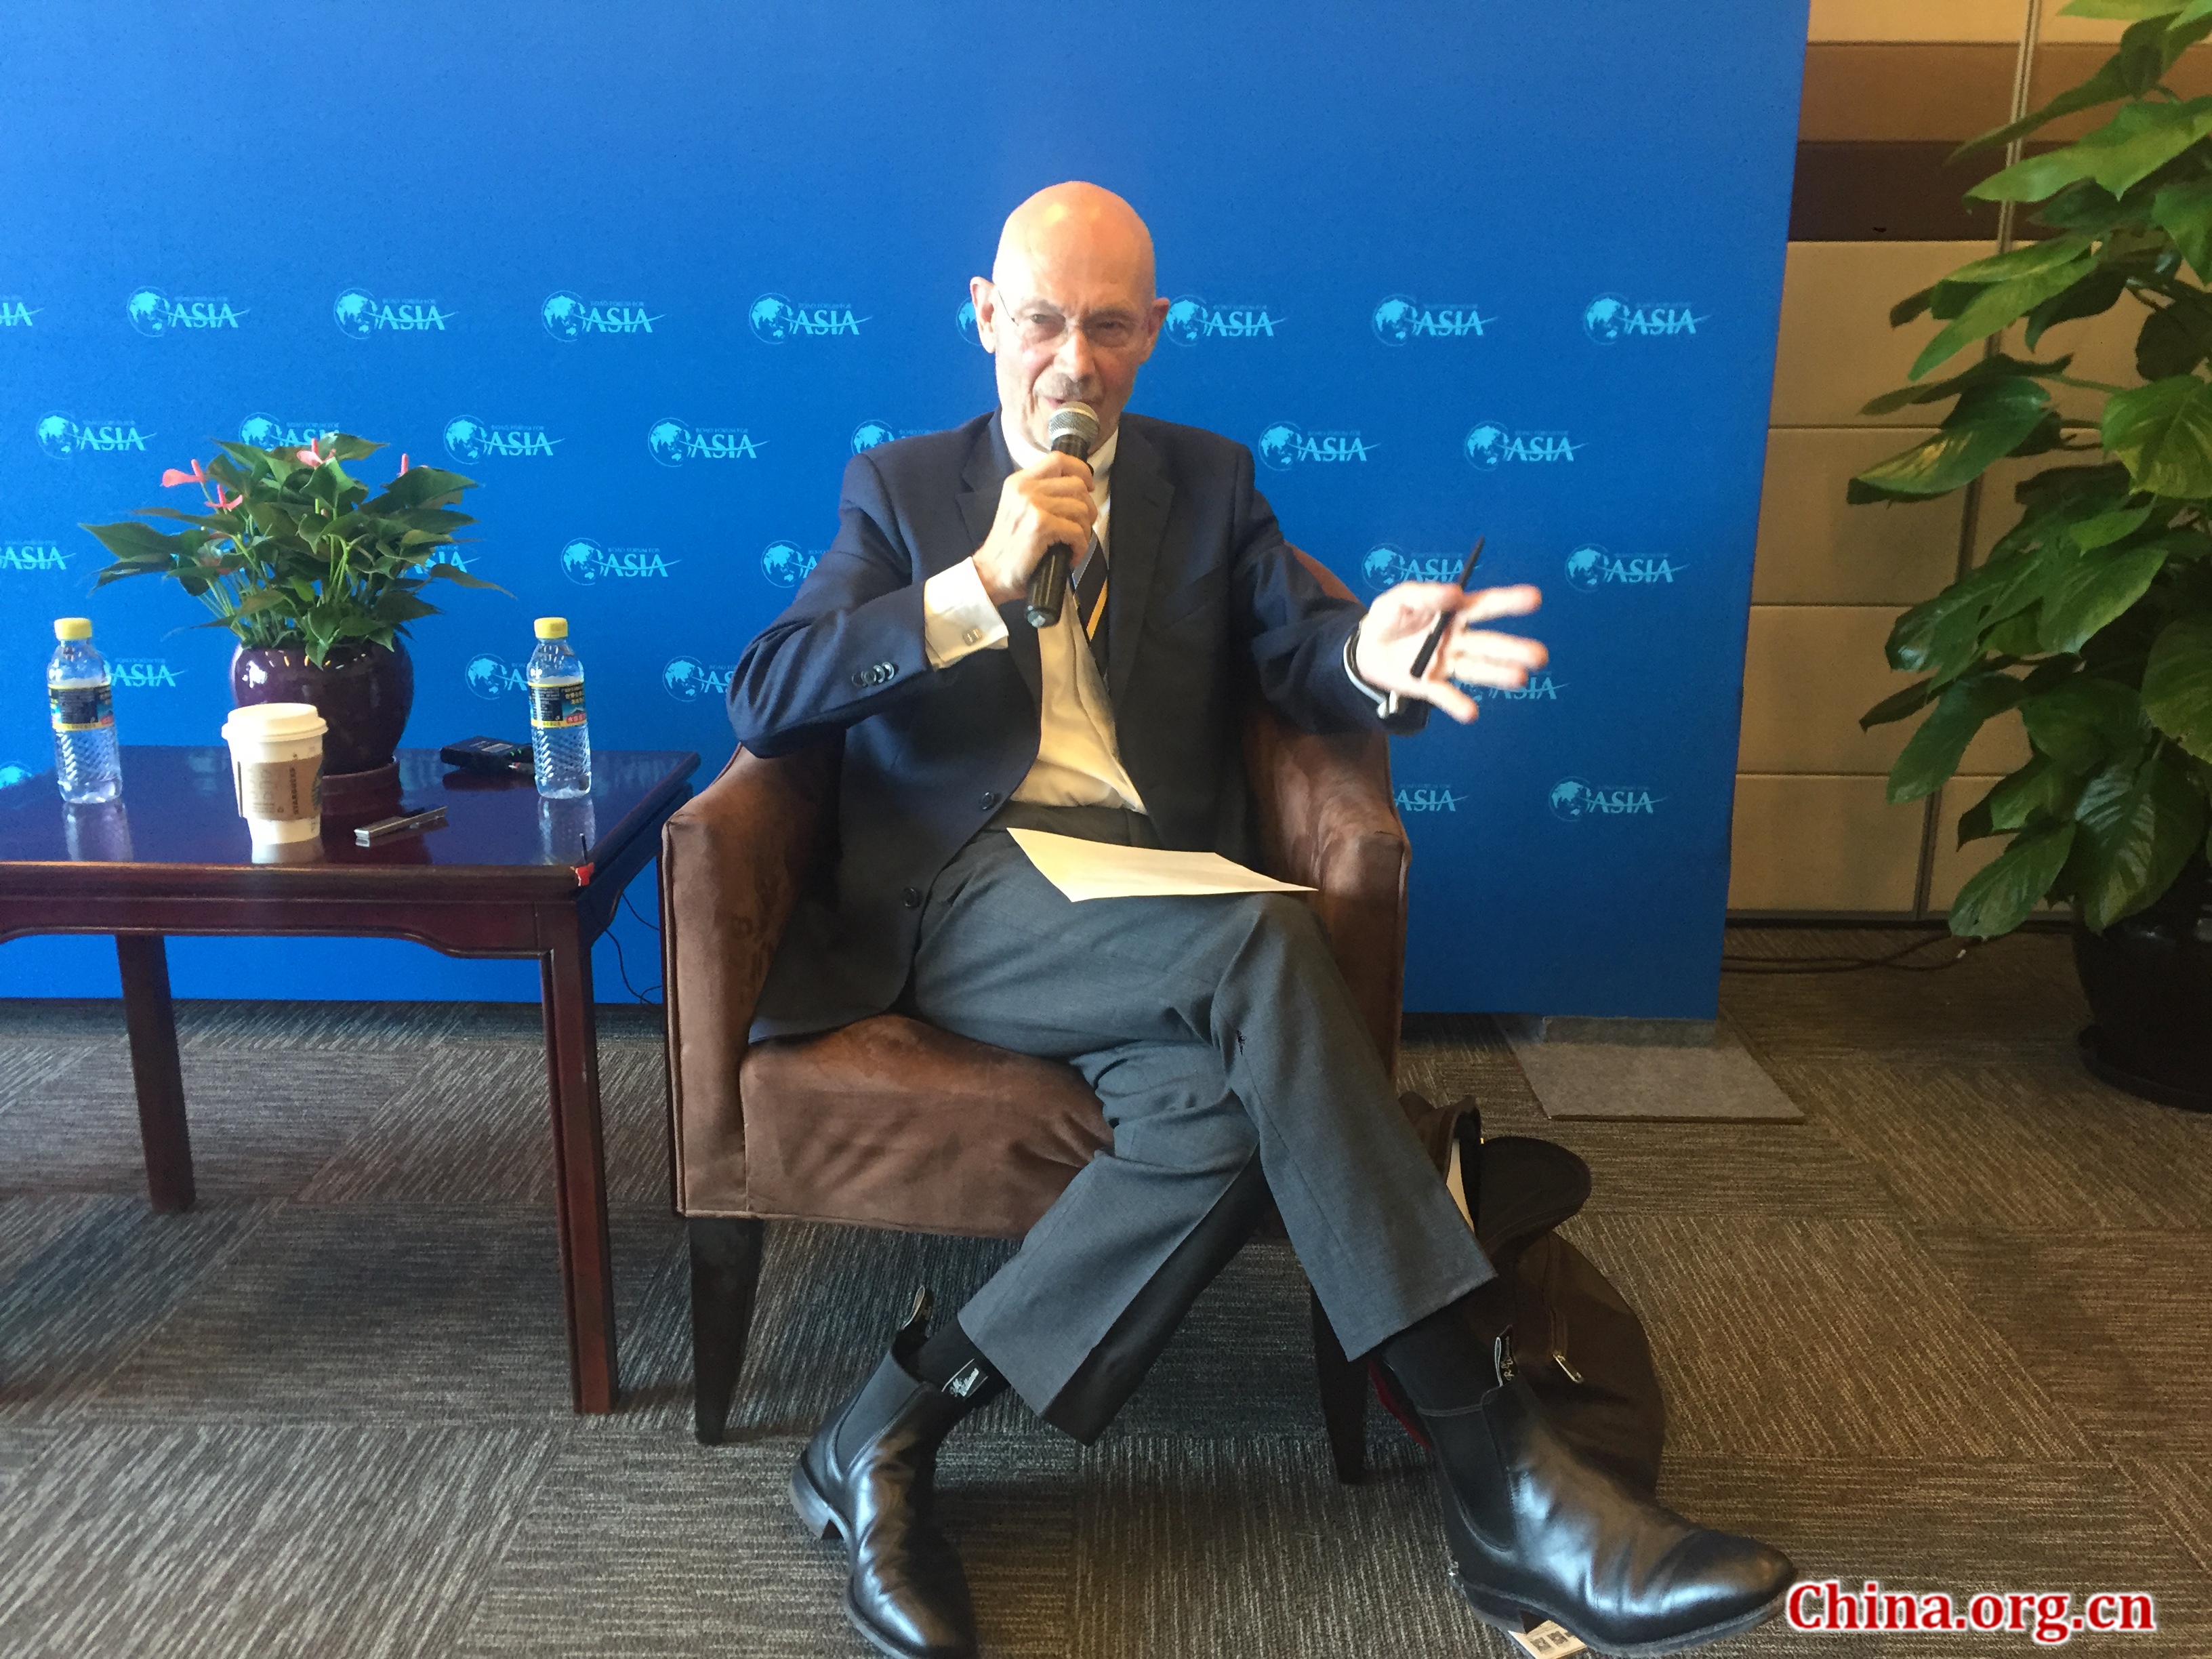 Pascal Lamy, former director-general of the WTO, speaks with media on Wednesday, April 11, 2018 at this year's Boao Forum for Asia. [Photo by Guo Yiming/China.org.cn]